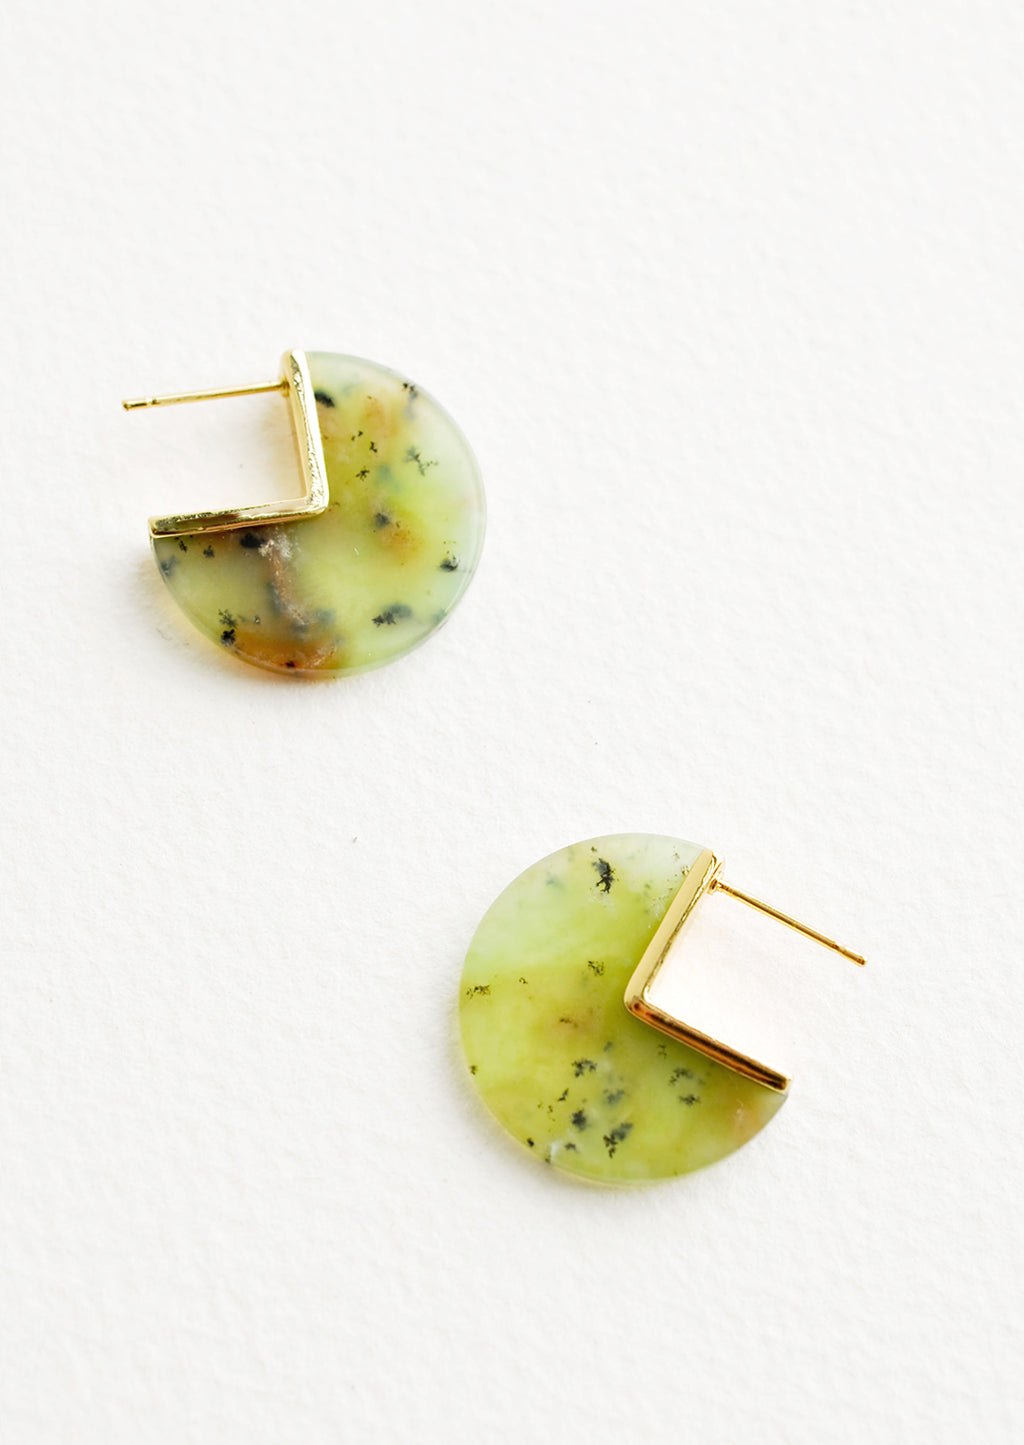 3: Three quarter disc shaped earrings of a yellow-green gemstone speckled with brown flecks with gold hardware and post back.